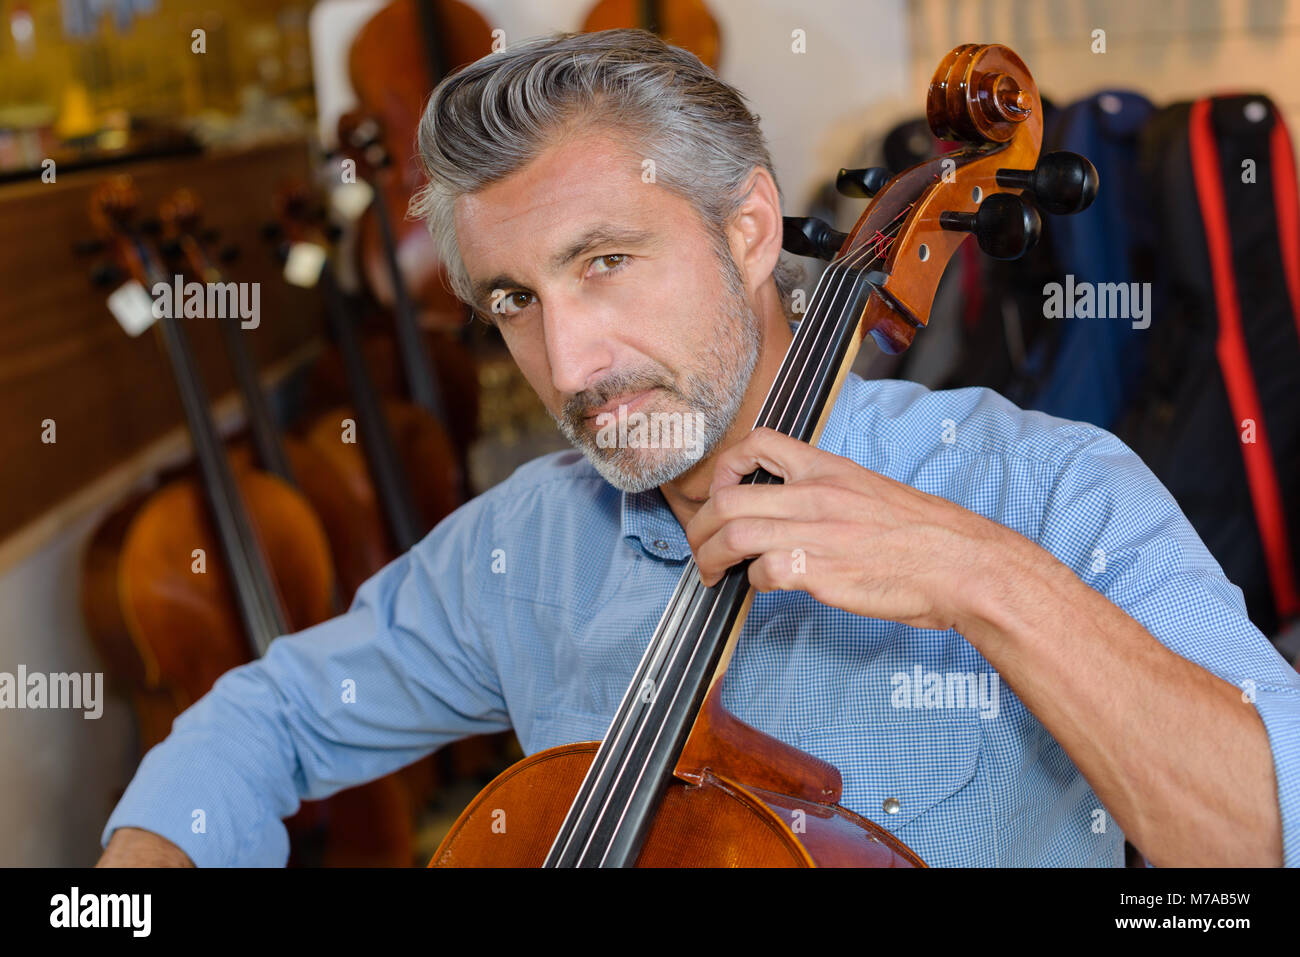 Cello Repair High Resolution Stock Photography and Images - Alamy